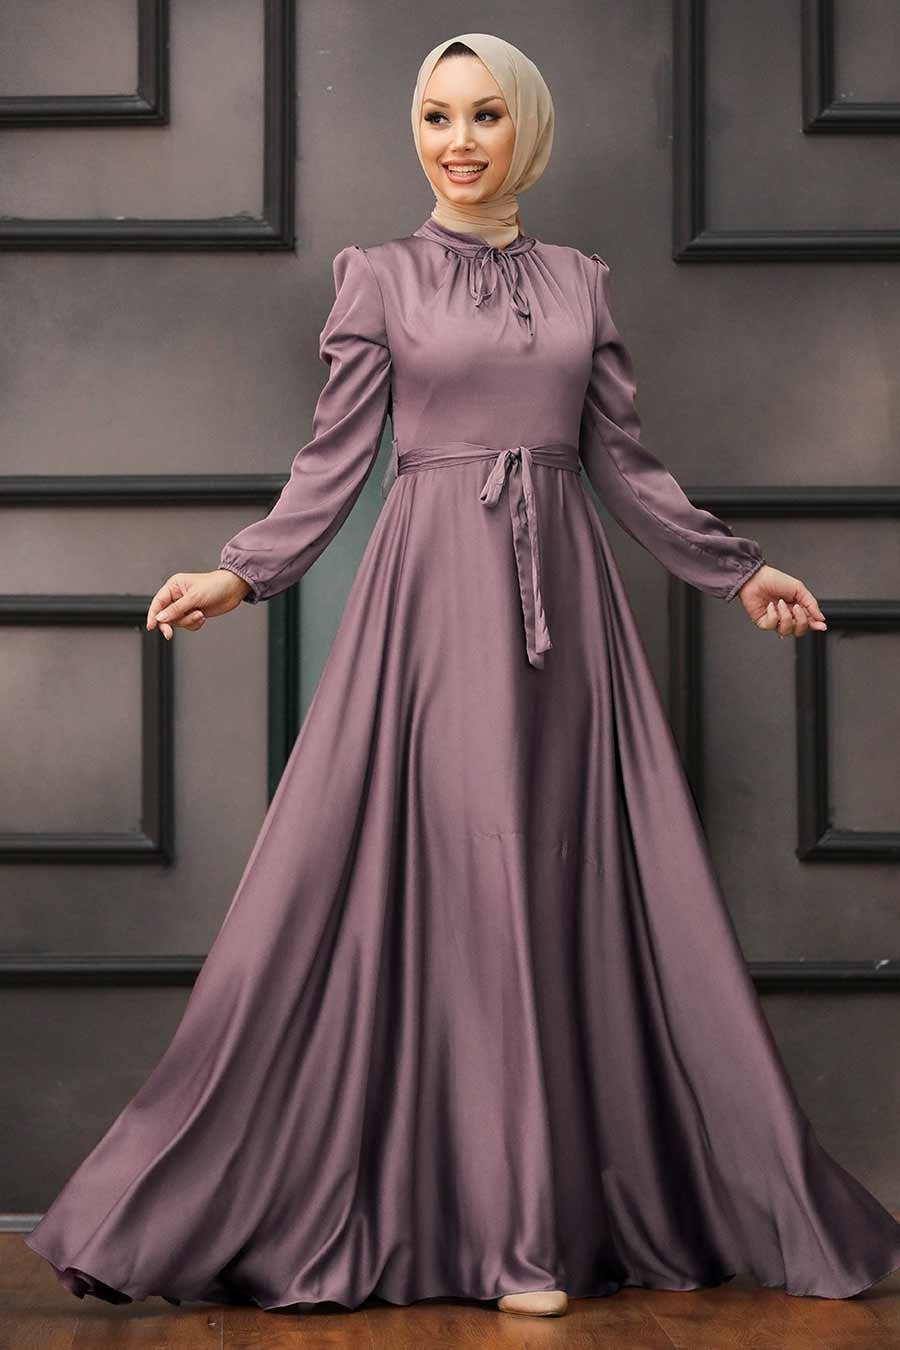 a woman in a long purple dress standing in front of a door